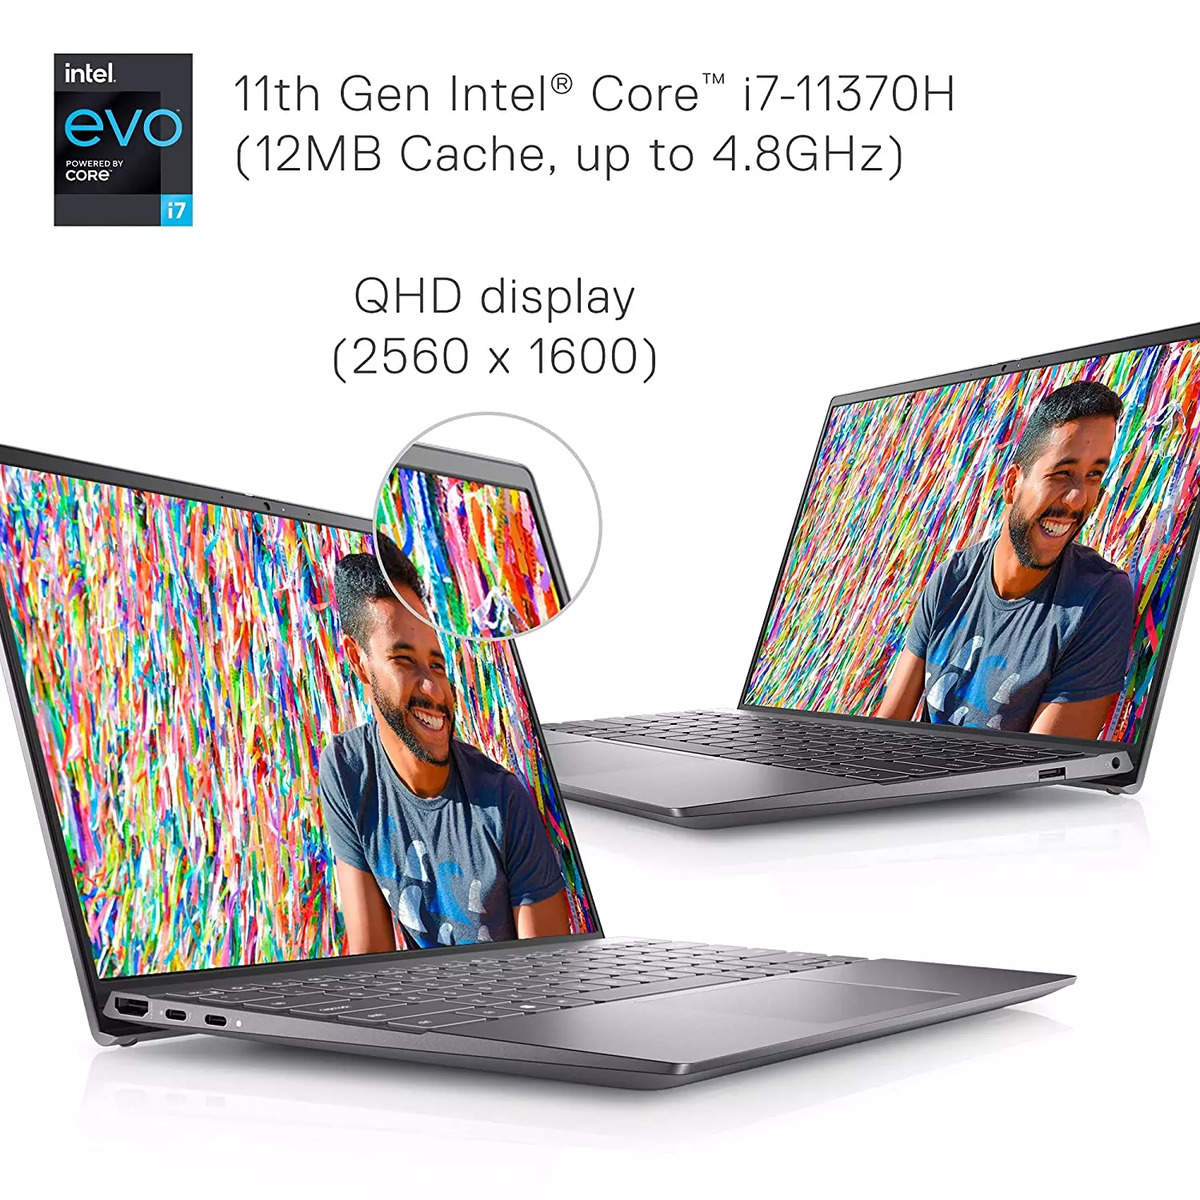 Dell Laptop 11th Gen Intel Core i7-11370H/16GB/512GB SSD/Windows 10 - Inspiron  13 5310-i5310-7923SLV-PUS Price in India, Full Specifications (30th Jul  2022) at Gadgets Now